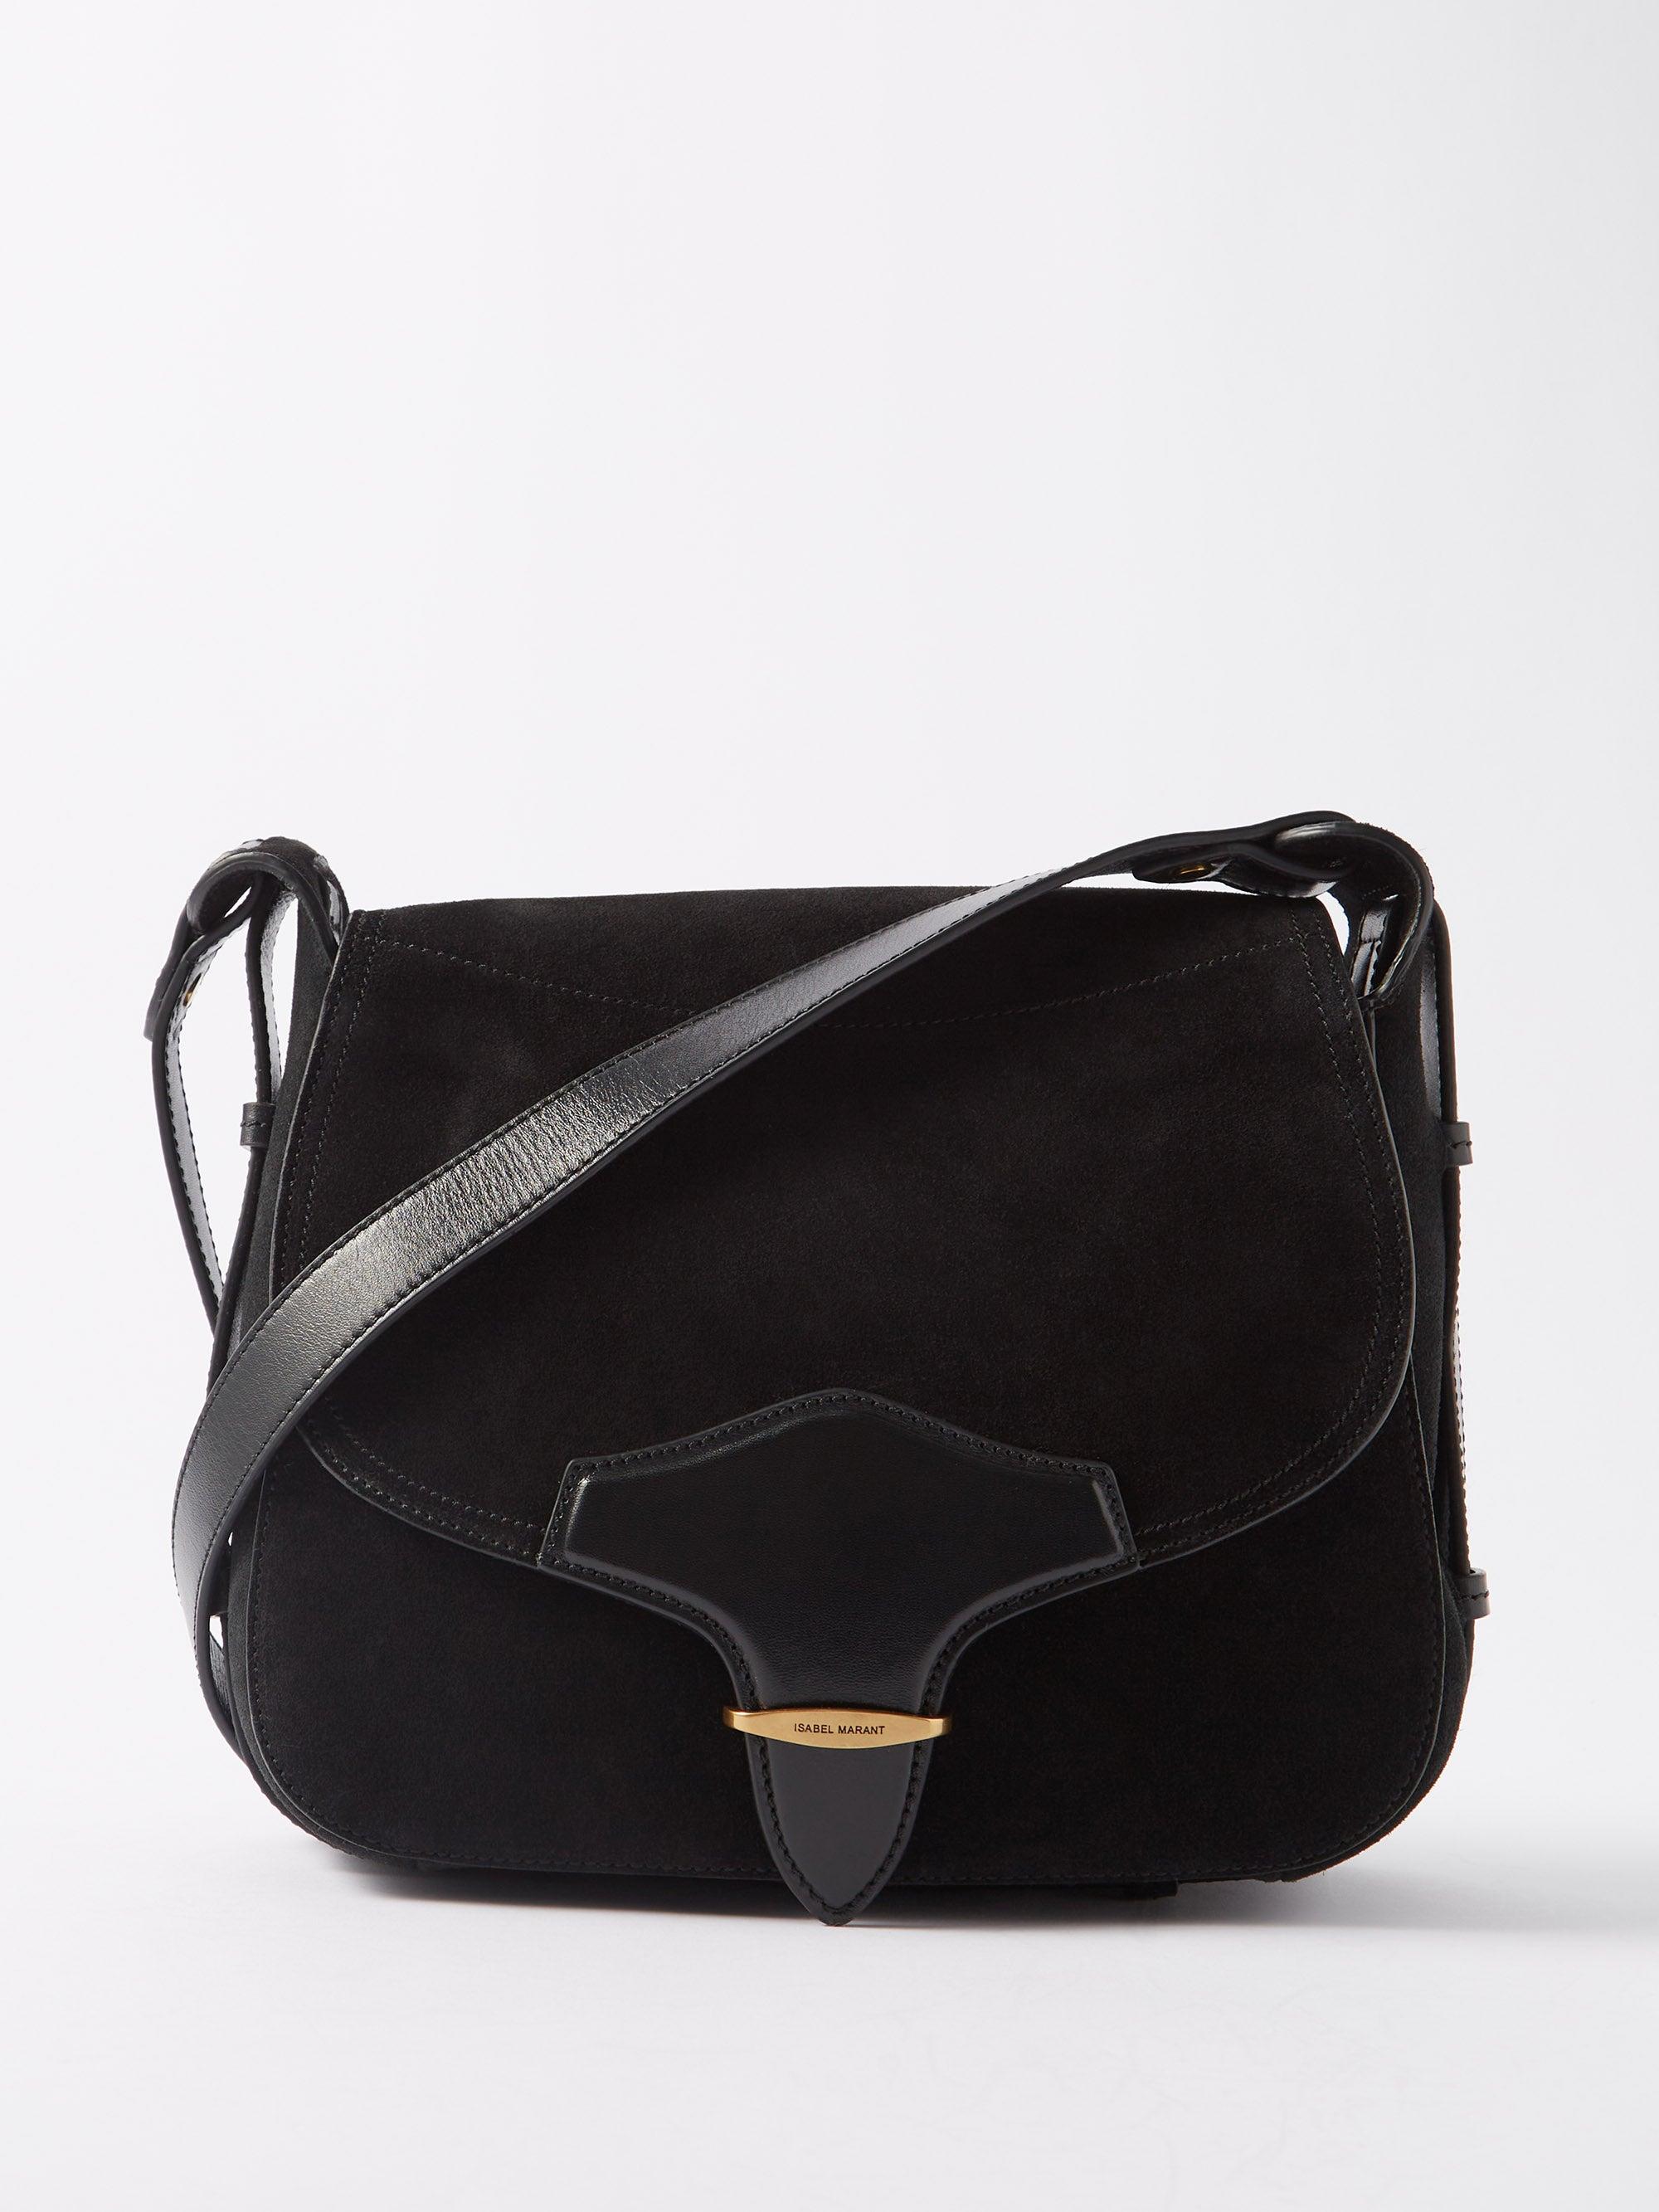 Isabel Marant Botsy Suede And Leather Cross-body Bag in Black | Lyst